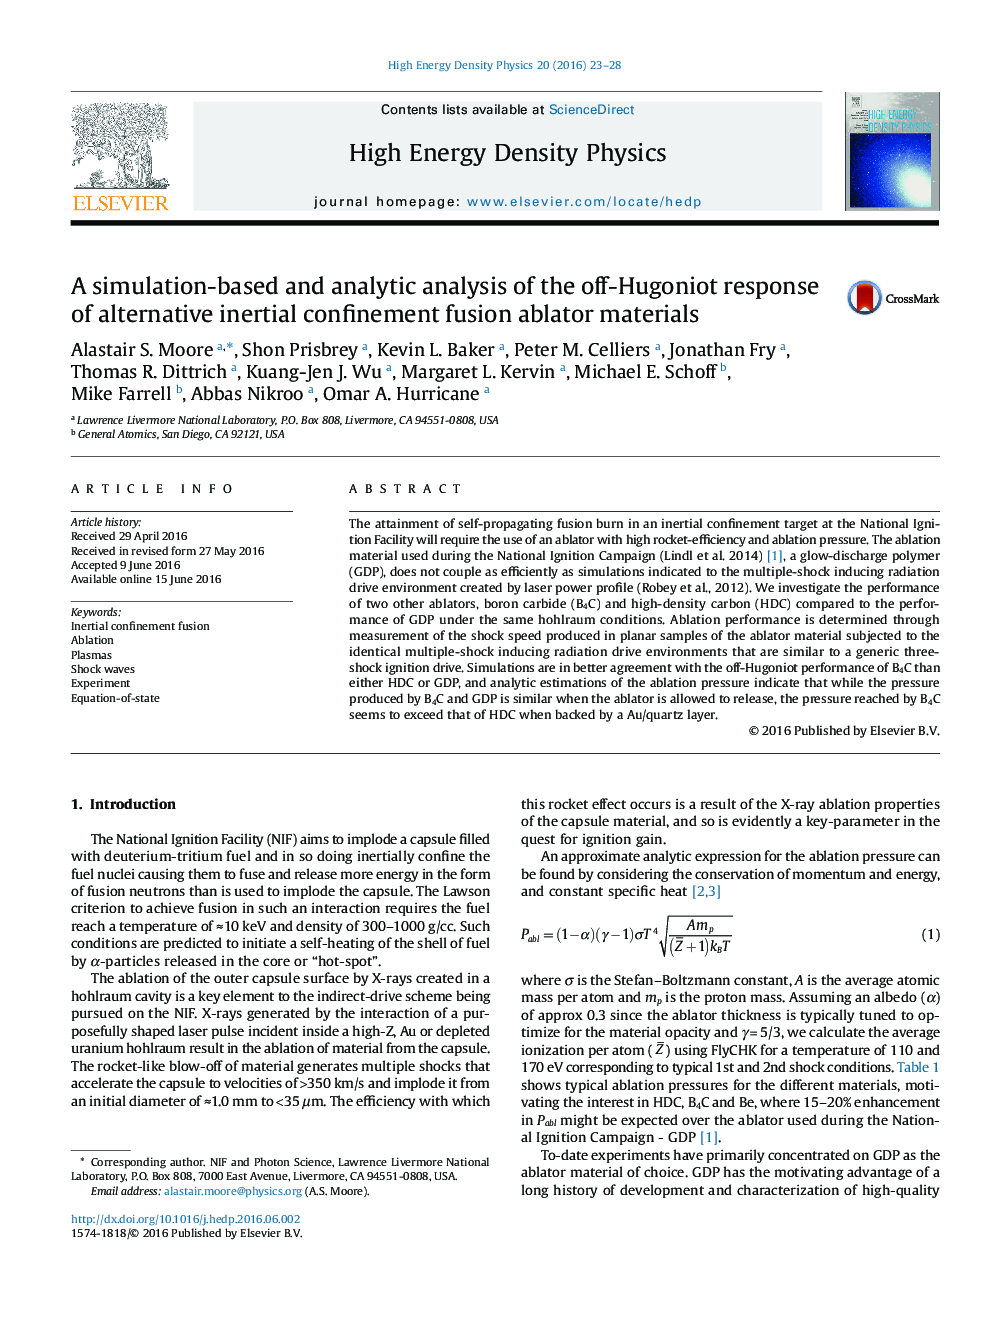 A simulation-based and analytic analysis of the off-Hugoniot response of alternative inertial confinement fusion ablator materials